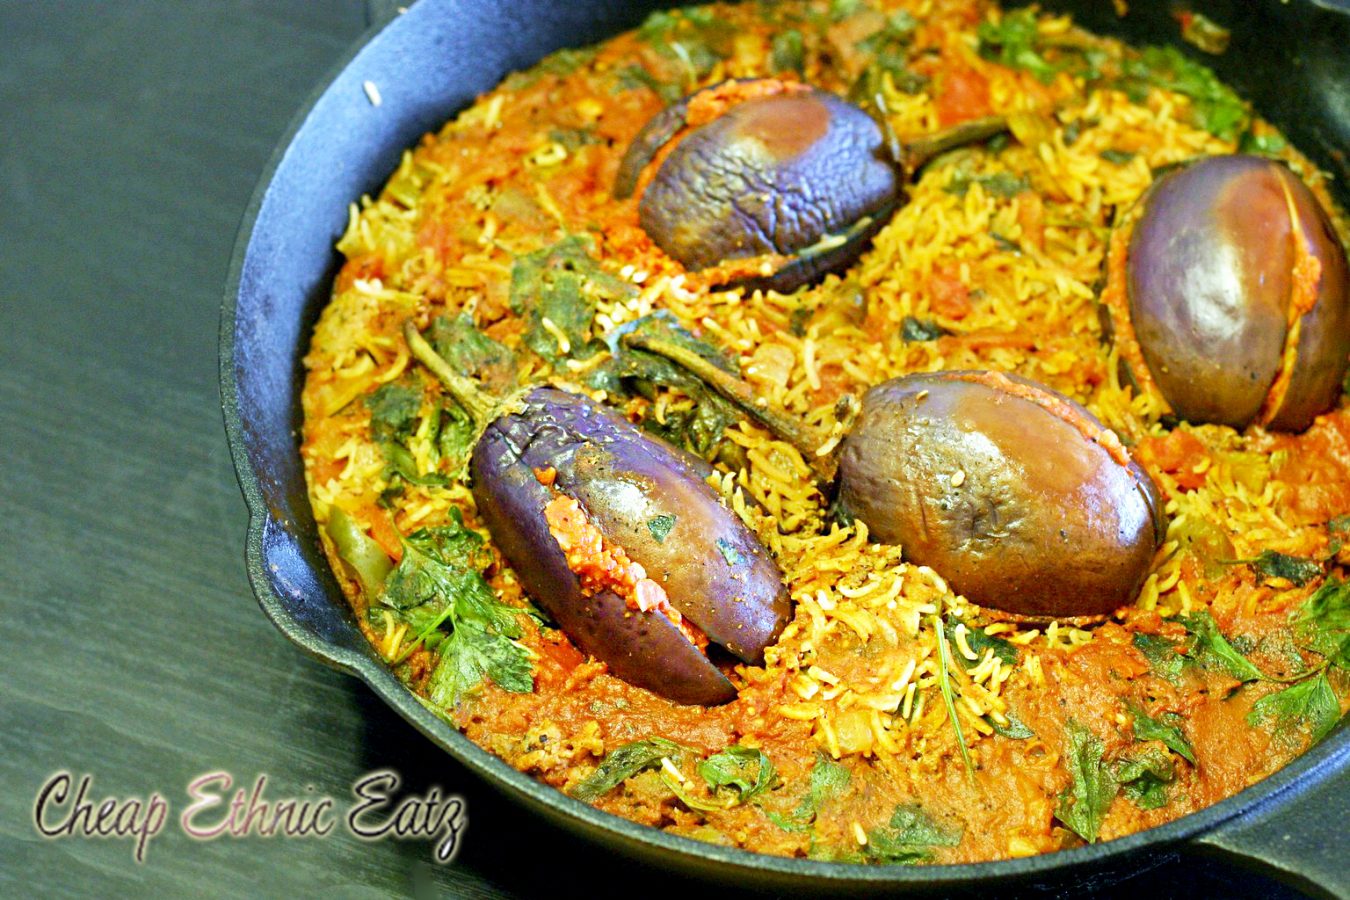 Stuffed Baby Eggplants in a Dirty Rice Pilaf 02